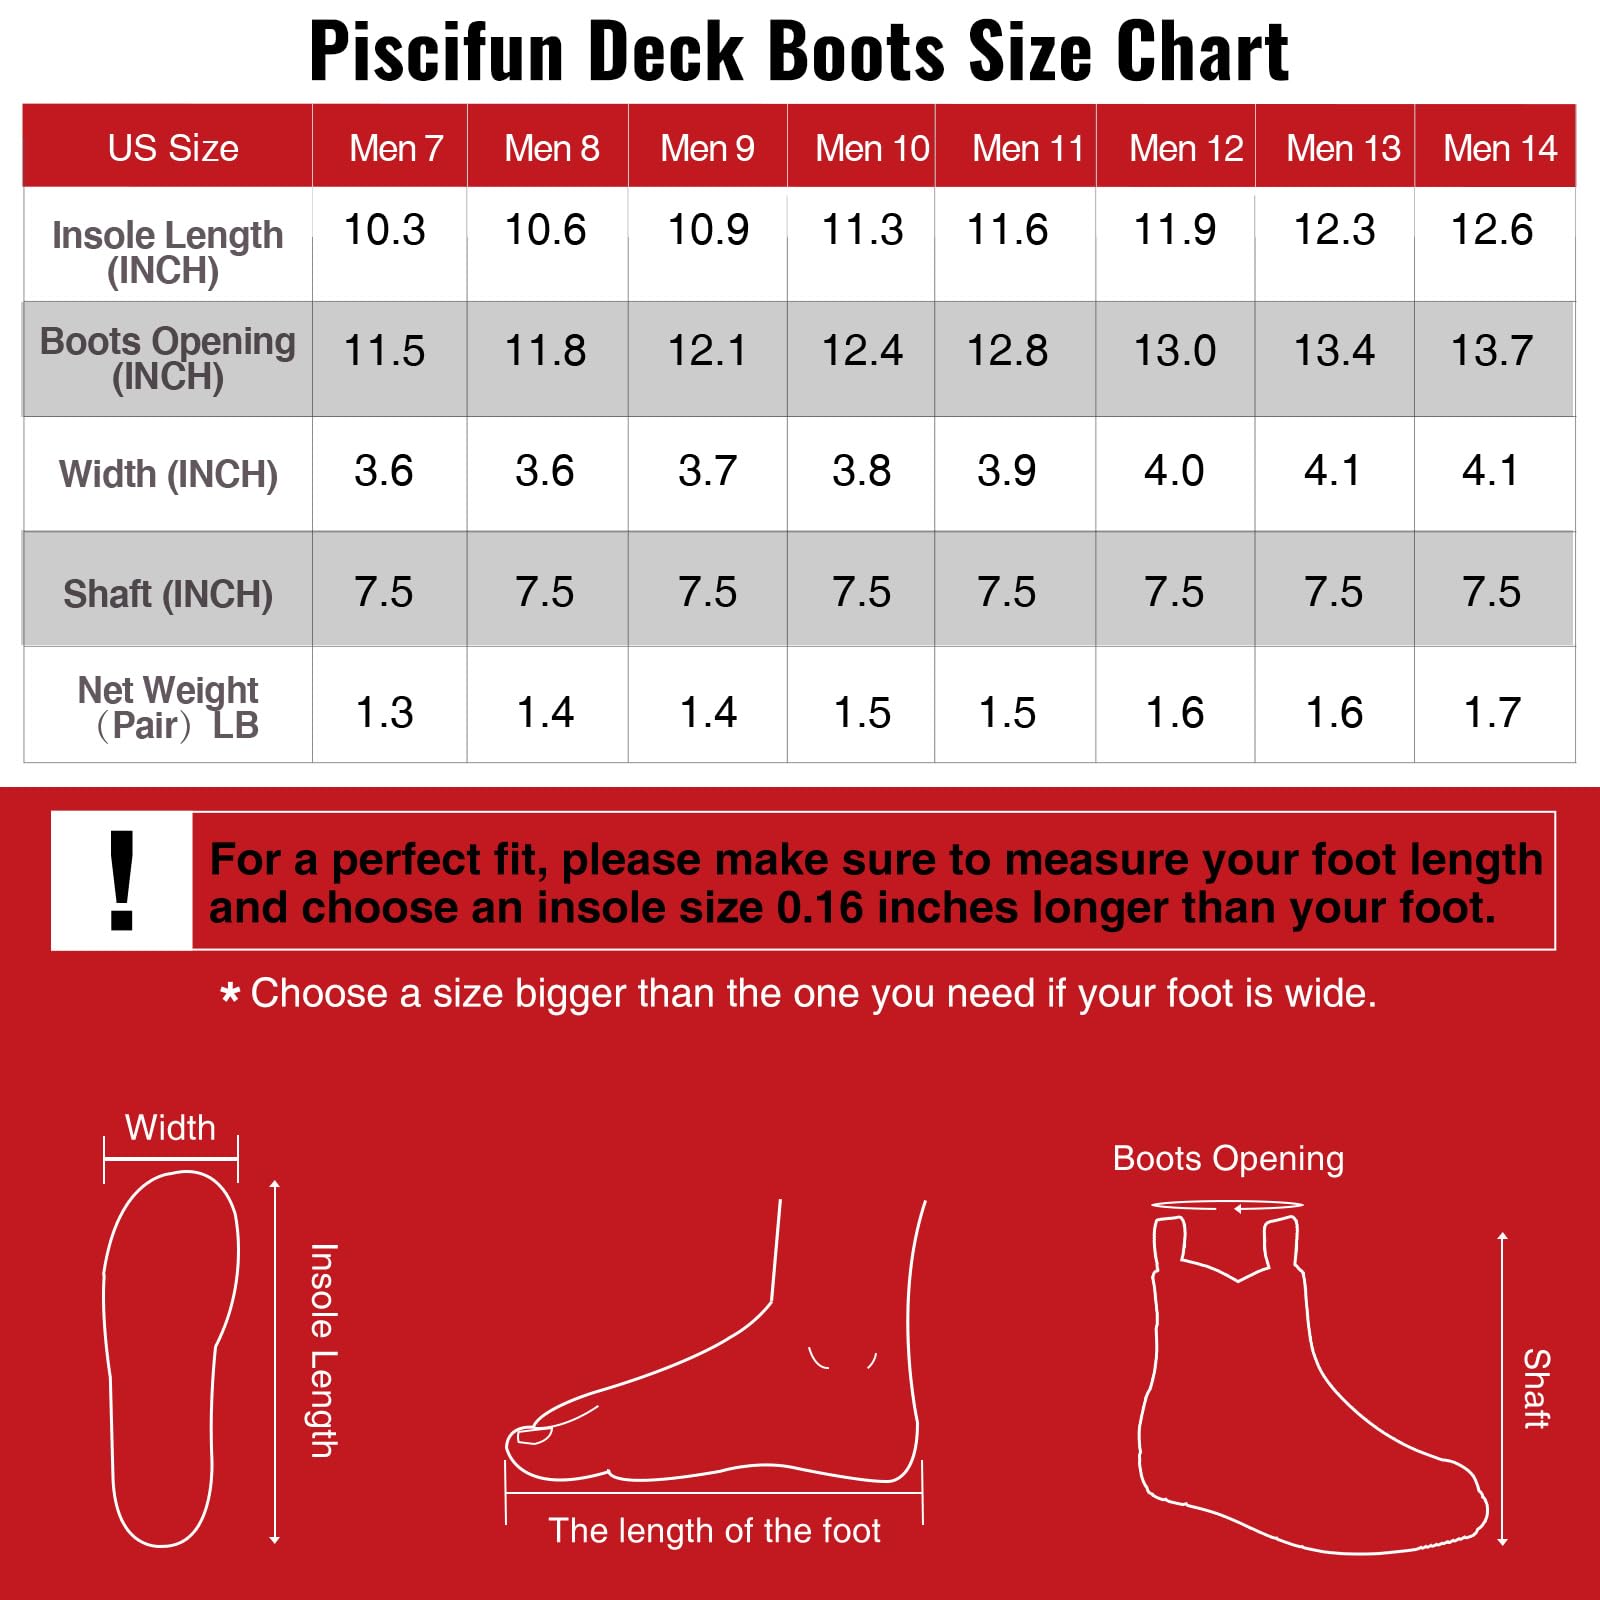 Piscifun Men’s Deck Boots, Waterproof Fishing Rain Boots, Anti-Slip Rubber Boots with Breathable Neoprene Lining